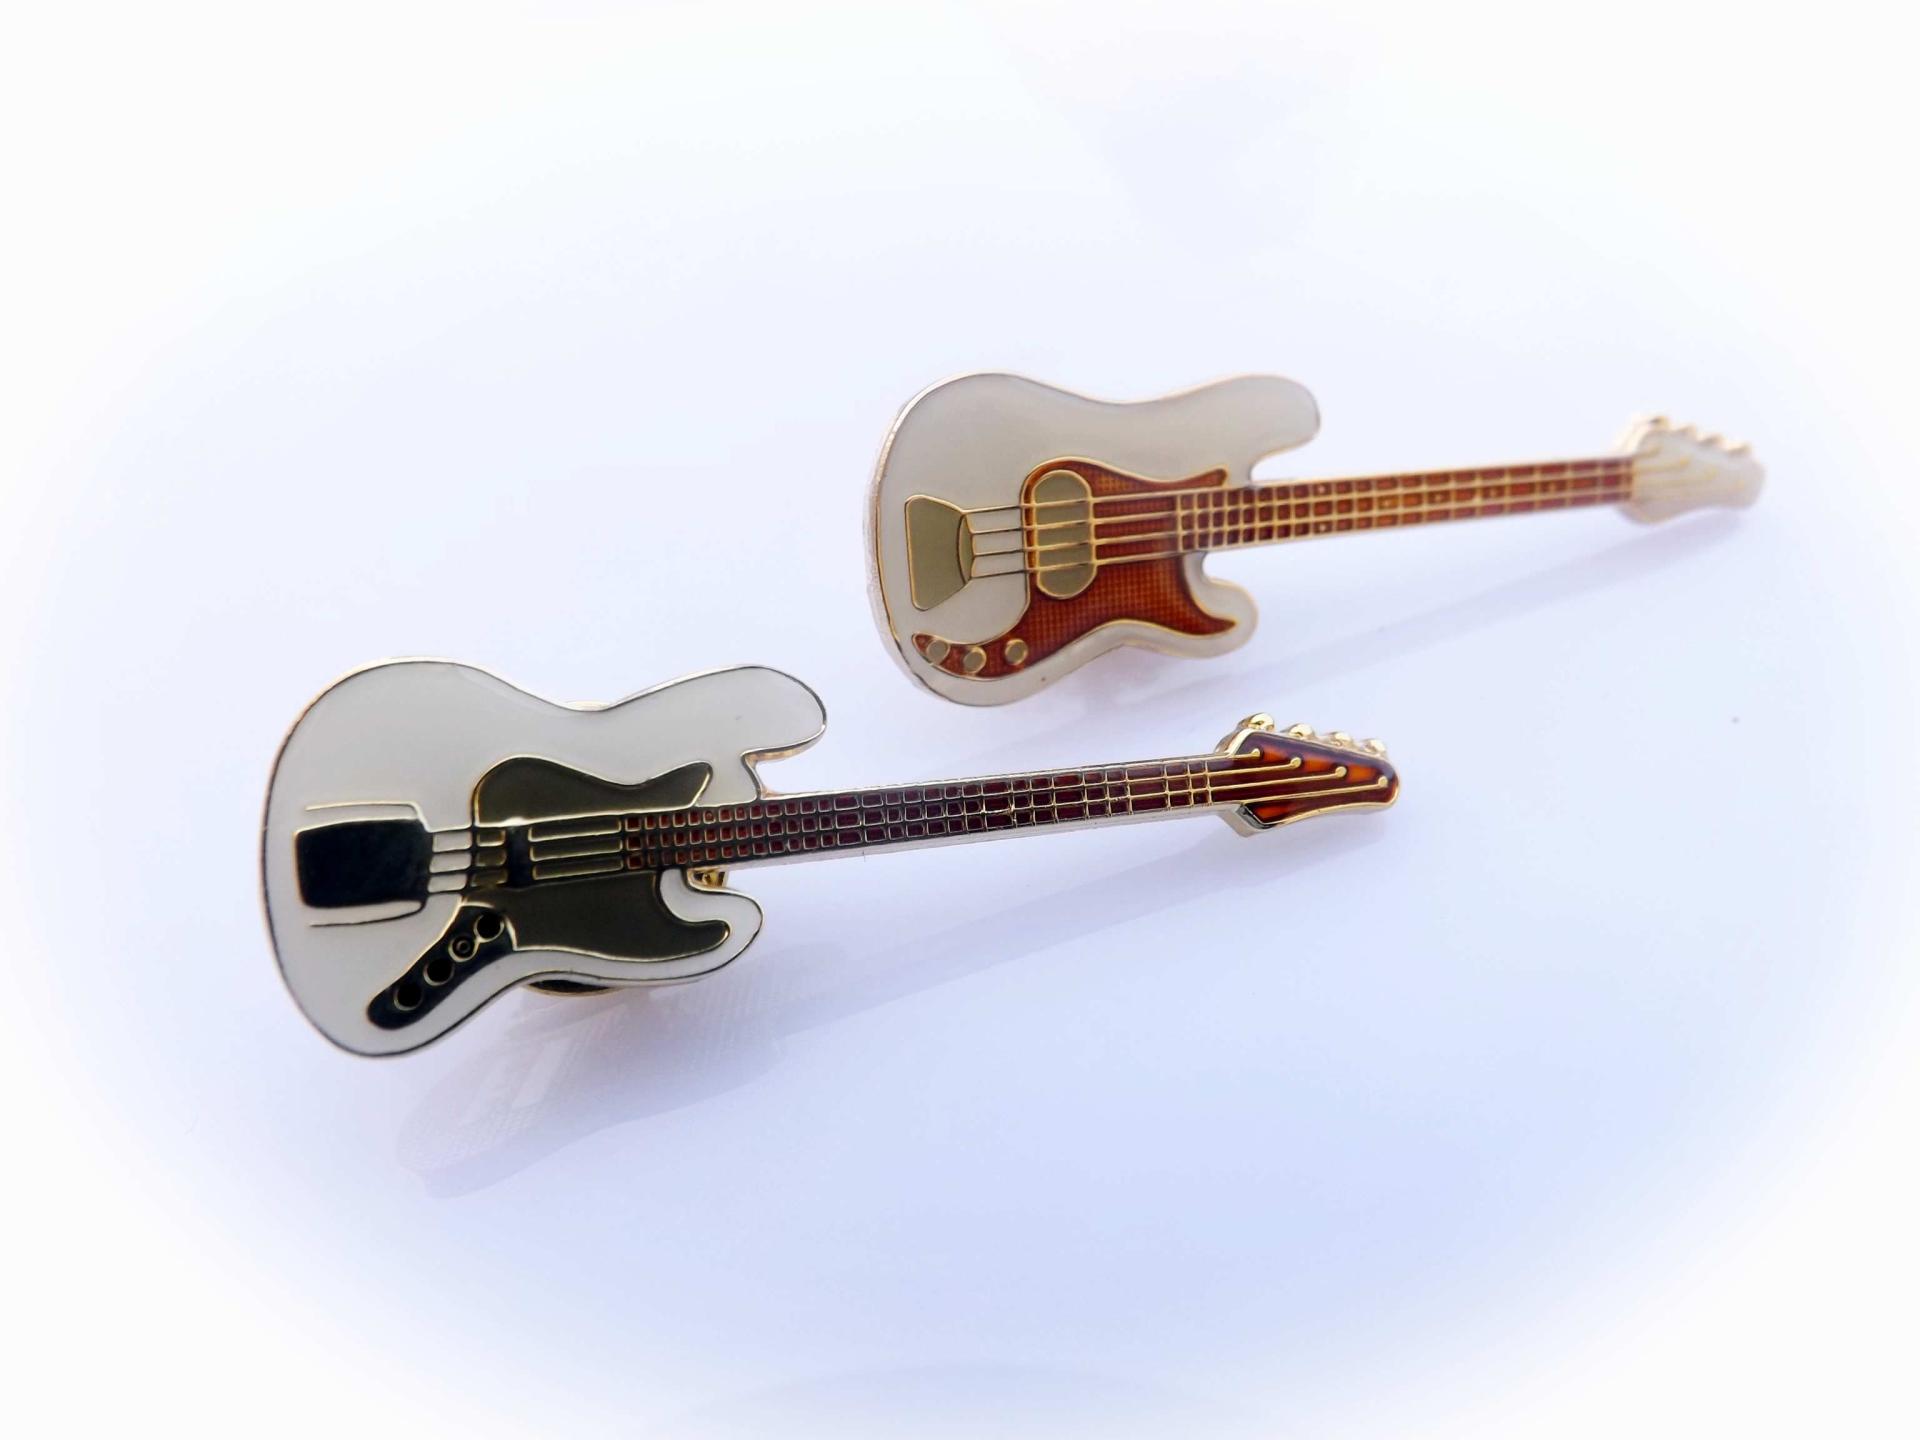 Bass Guitar Fender Style Pin / Brooch with Black Scratch Plate